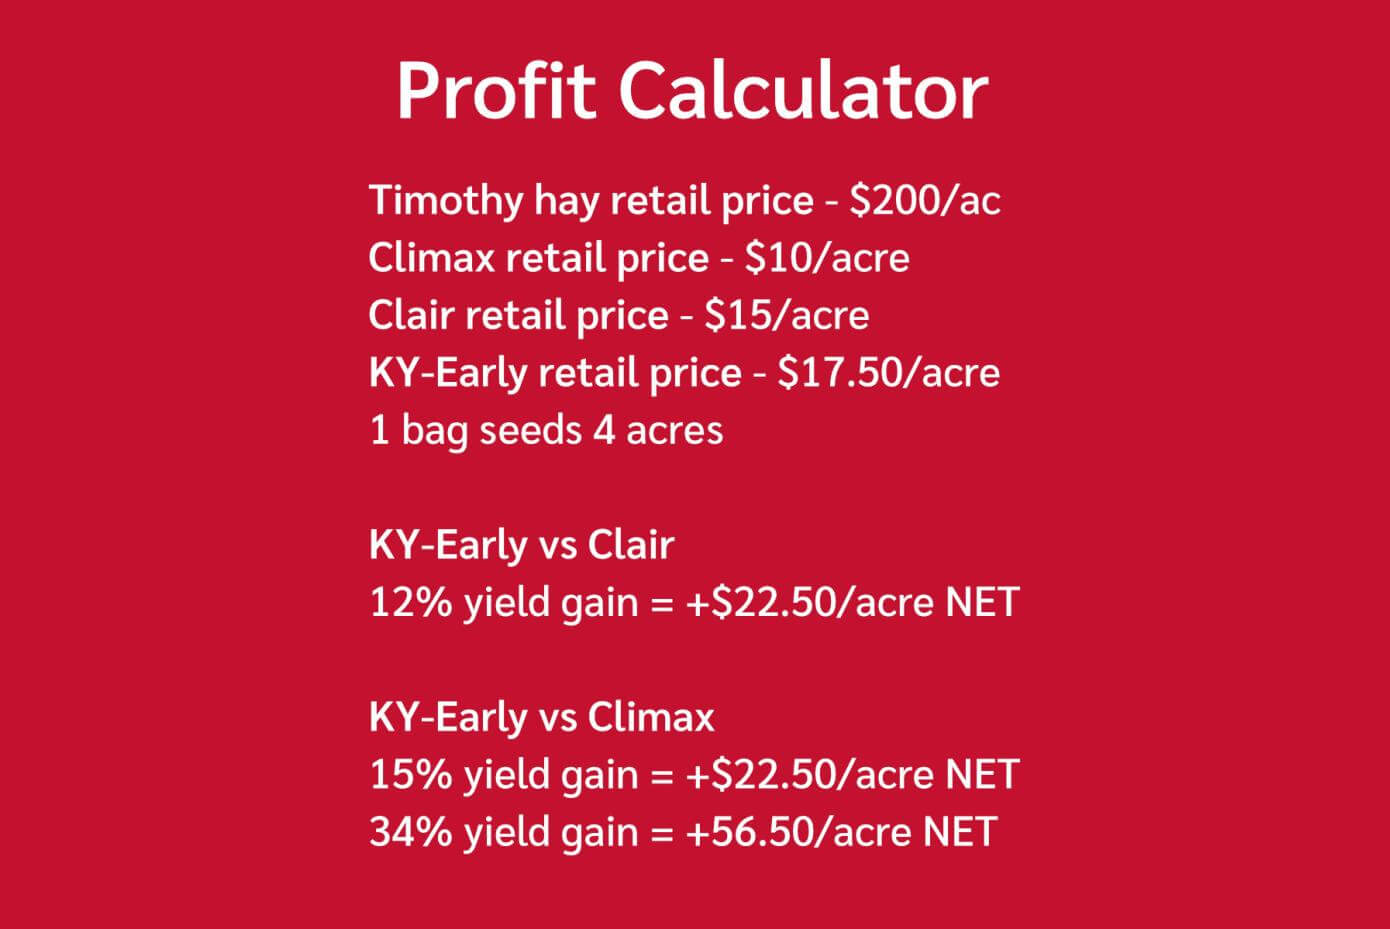 KY-Early profit calculator